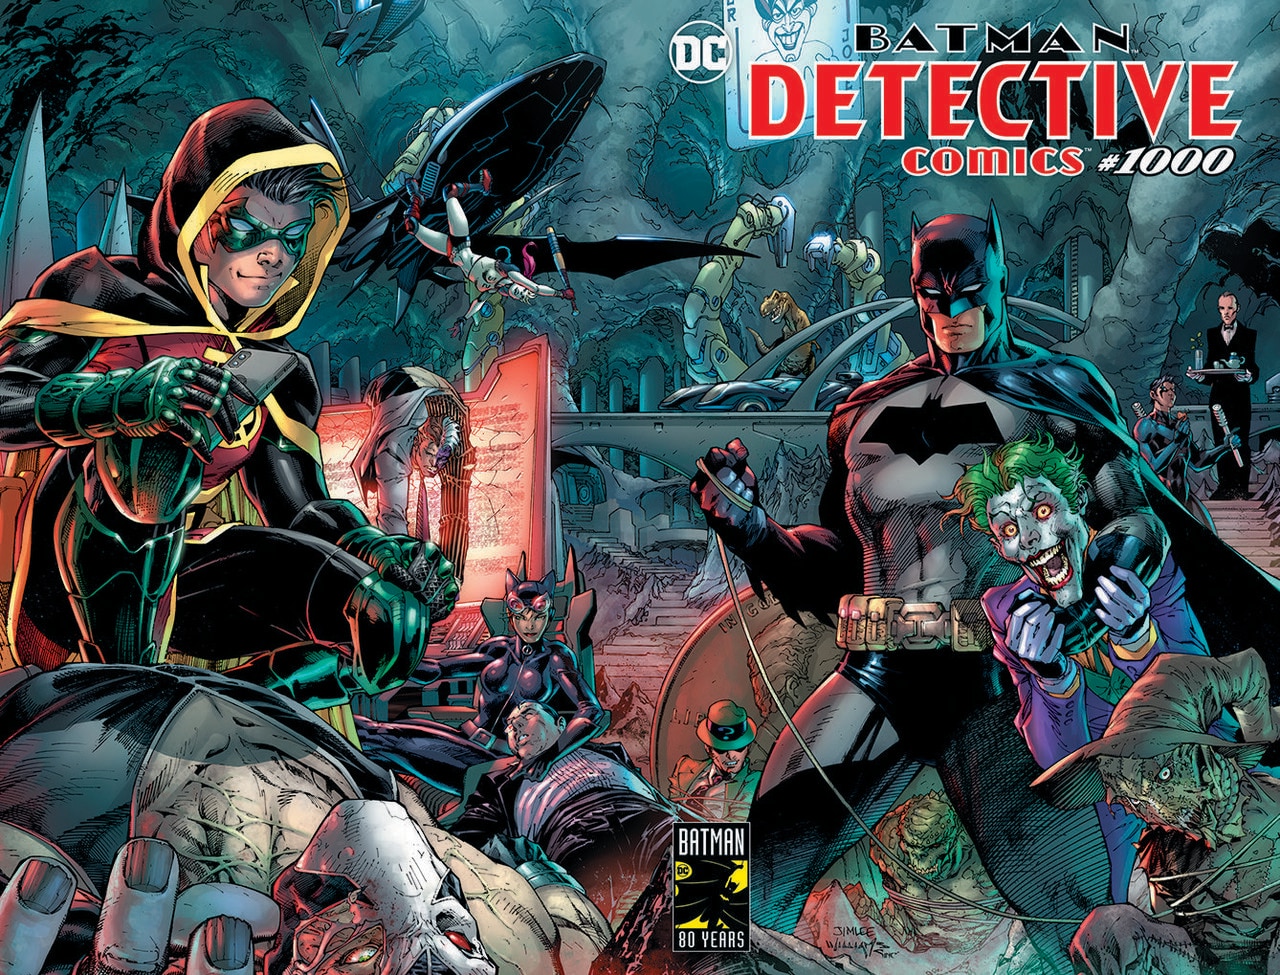 10 Bat-Tastic Detective Comics stories to prepare you for issue #1000 |  SYFY WIRE